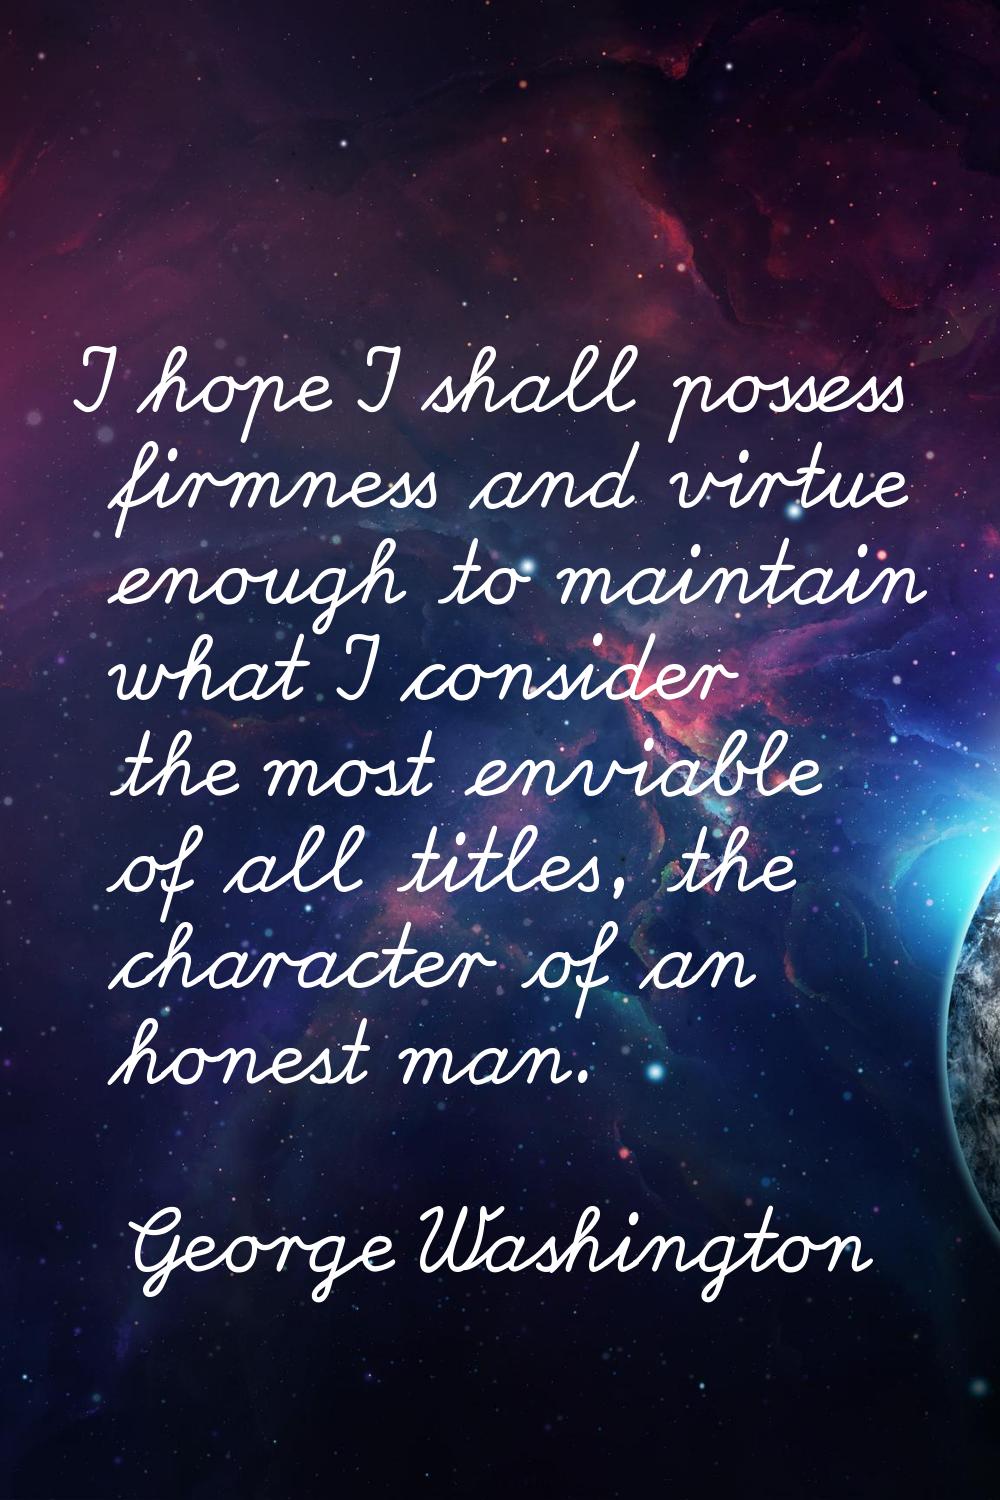 I hope I shall possess firmness and virtue enough to maintain what I consider the most enviable of 